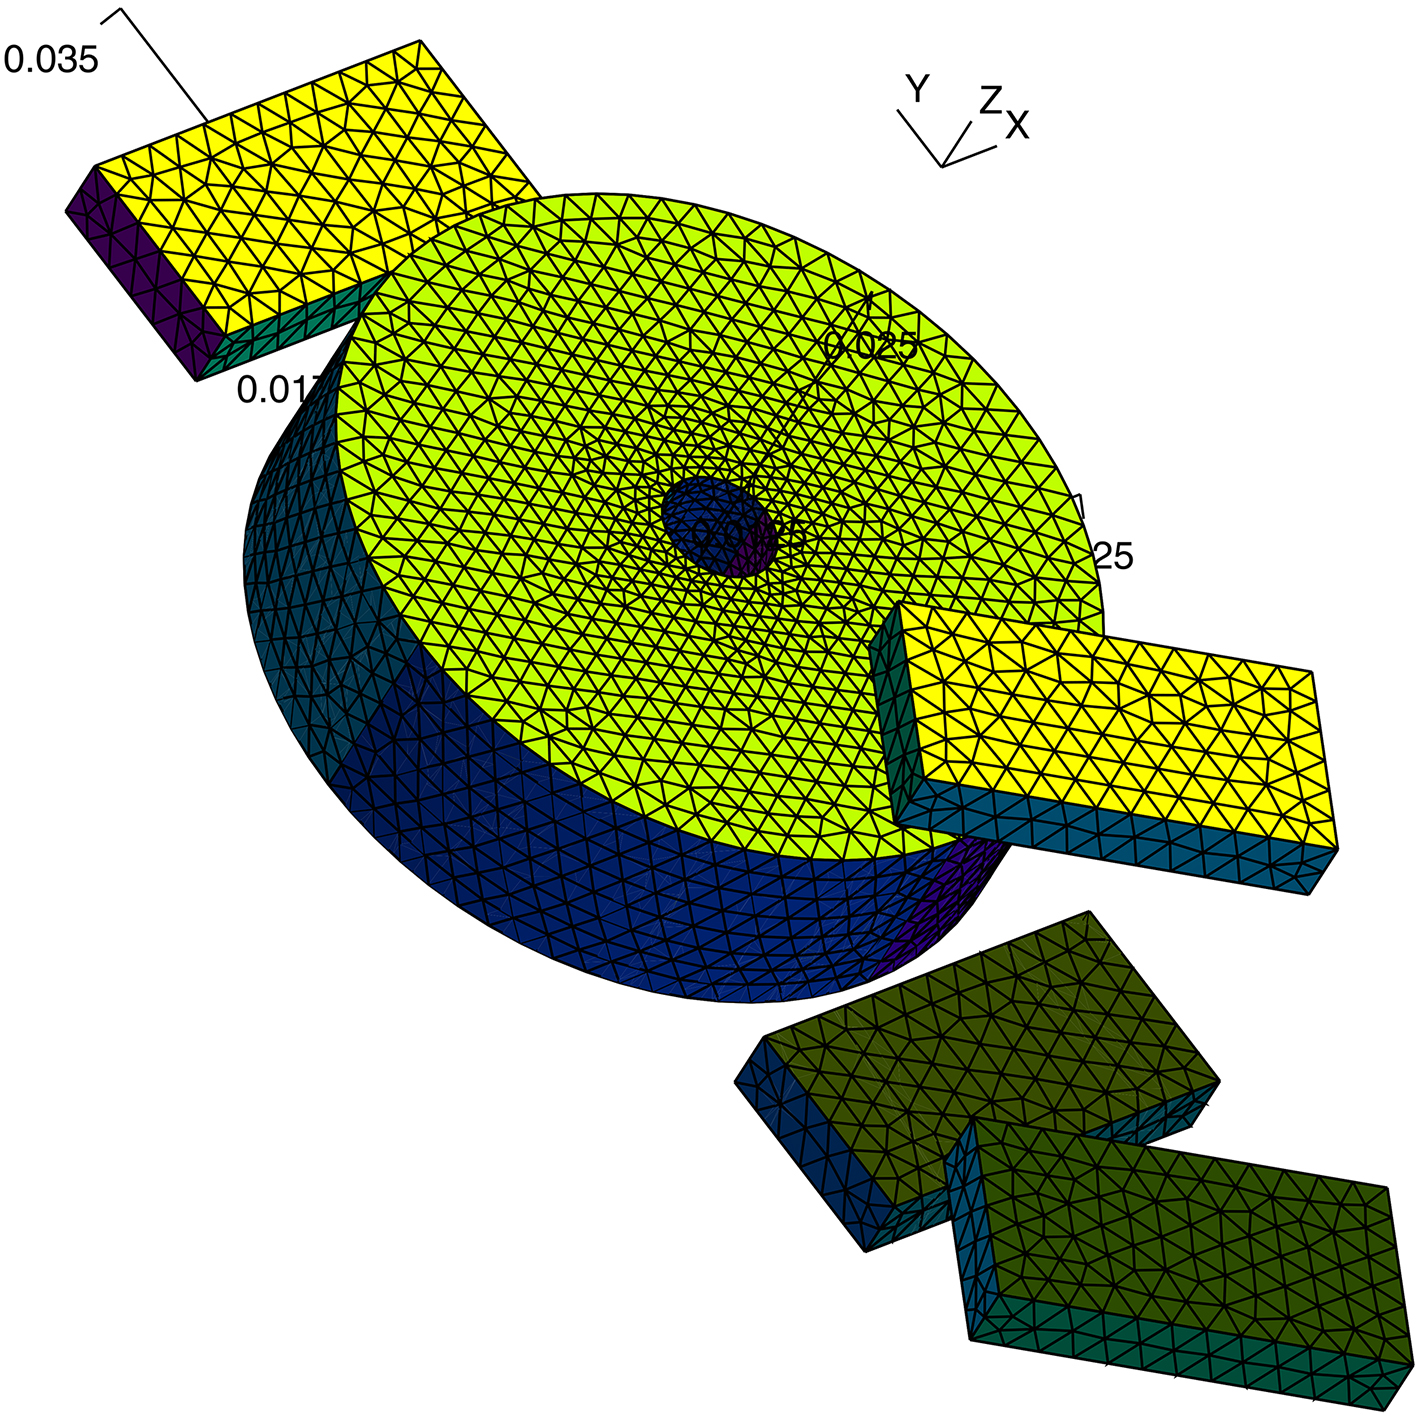 Finite element model showing a 3d mesh for one half of the system considering composite motion.